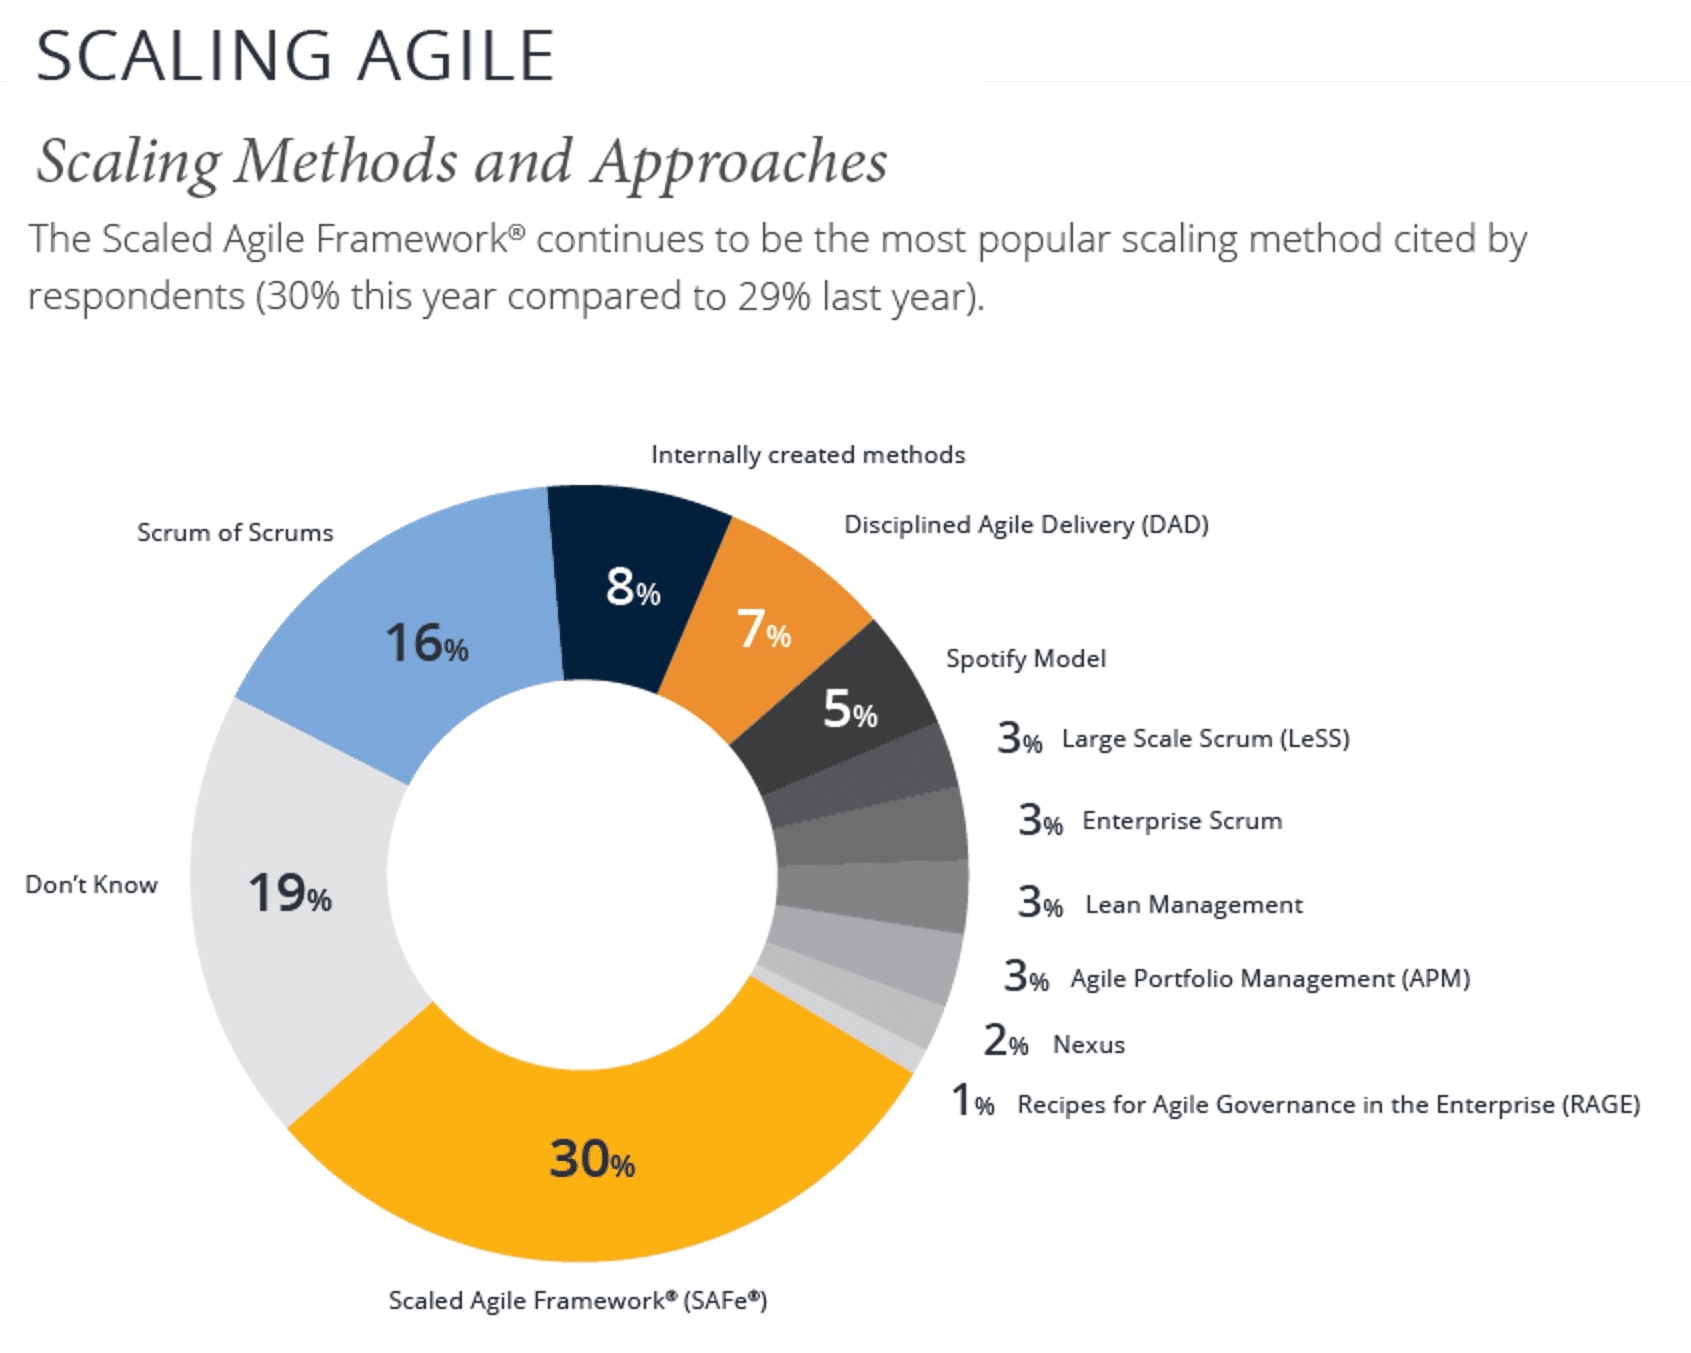 There is No Spotify Model for Scaling Agile | DeviceDaily.com